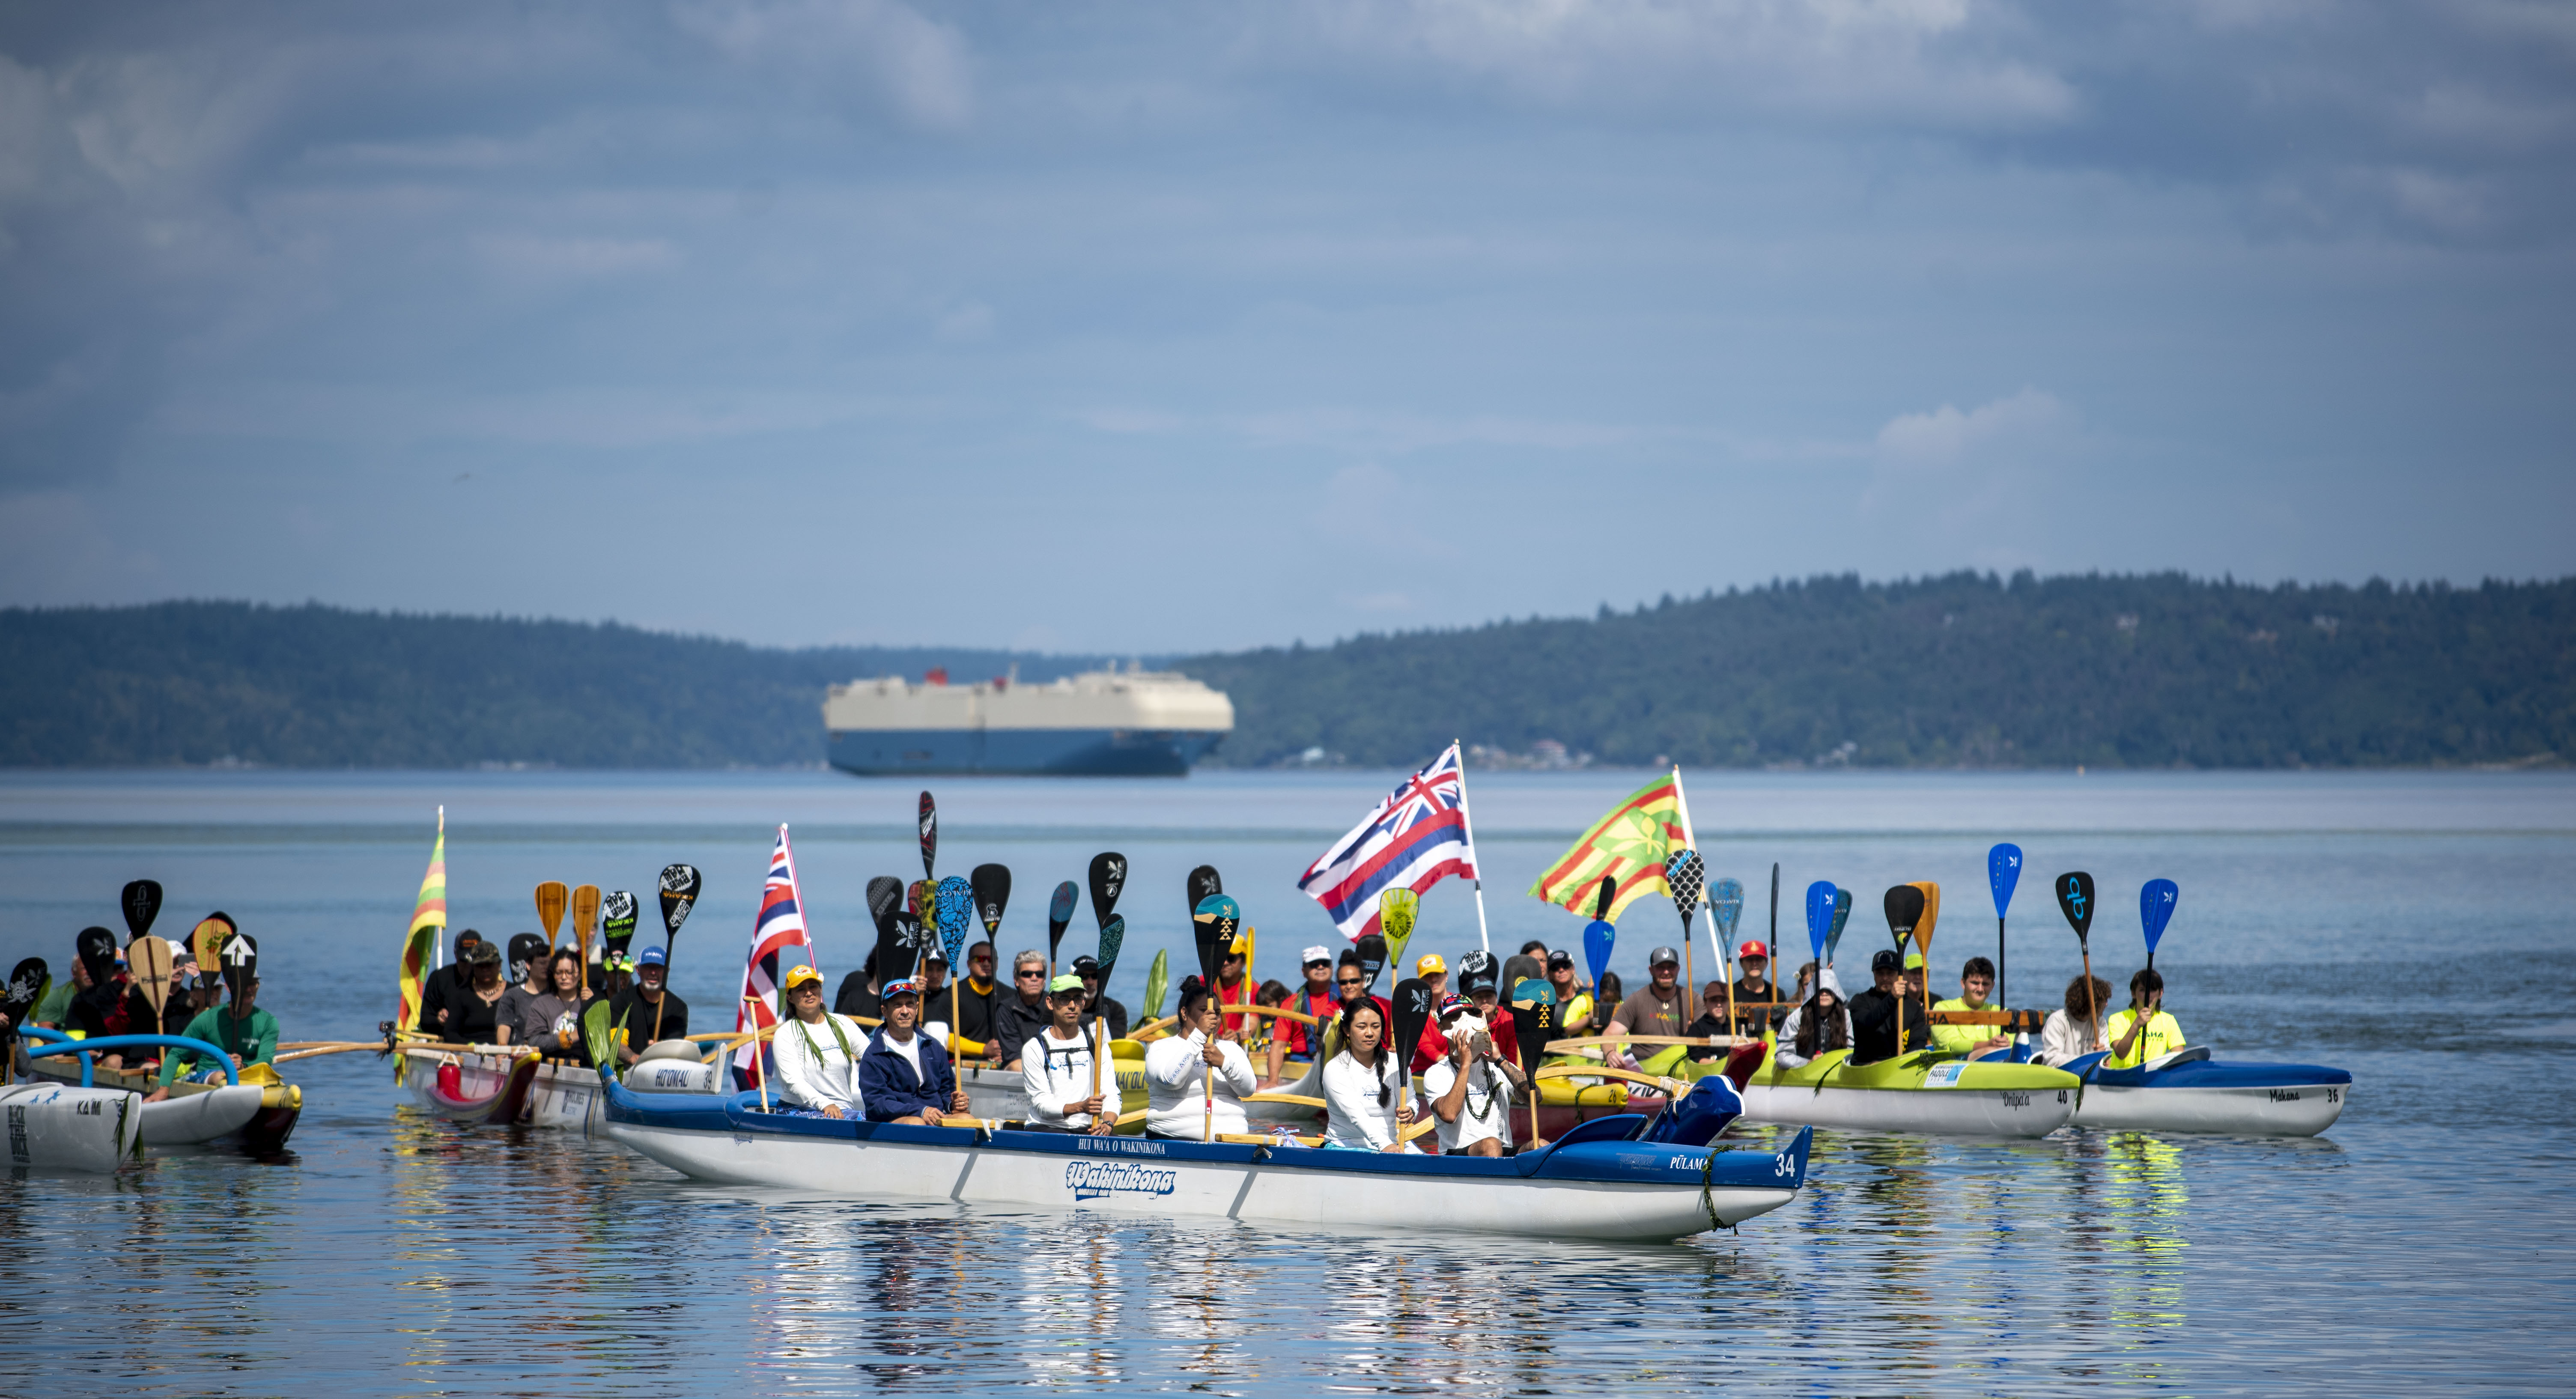 After traditional protocols, tribal members escorted Hōkūleʻa to the waters off Thea’s Park, where the outrigger canoe community offered a water welcome.